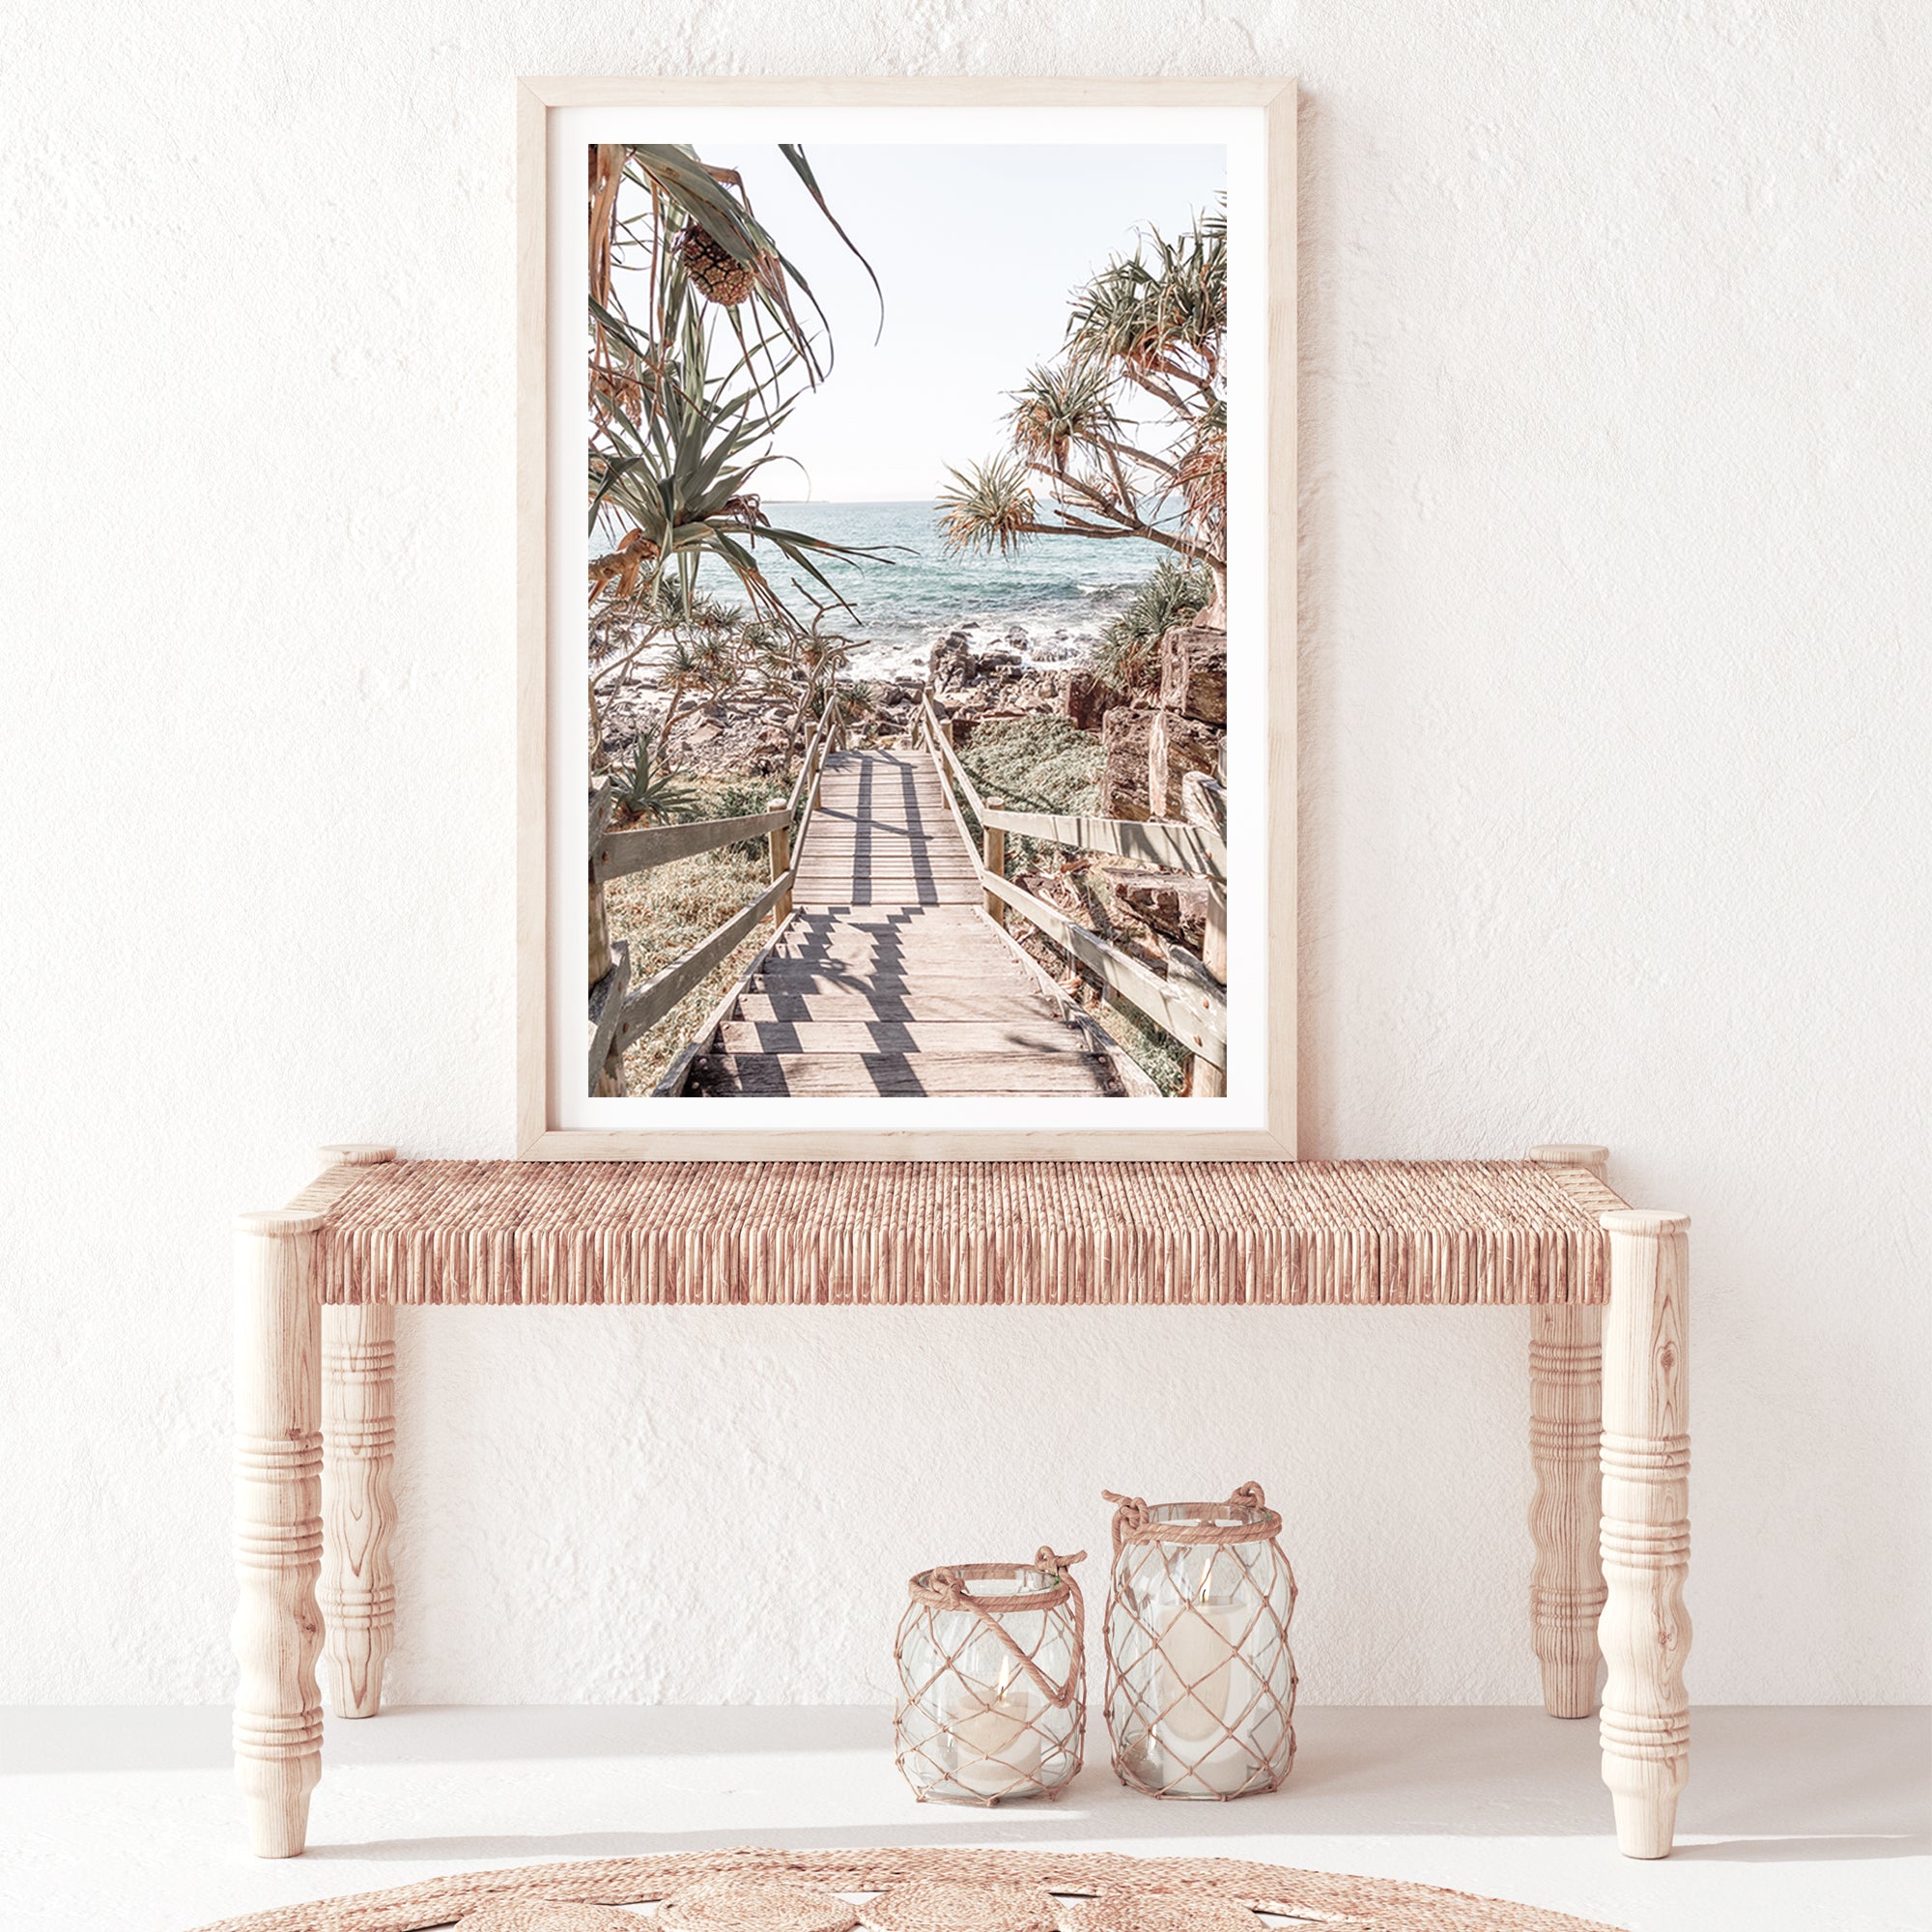 Enjoy the view of the beach and sea in this coastal artwork of stairs with trees leading onto a Queensland beach.